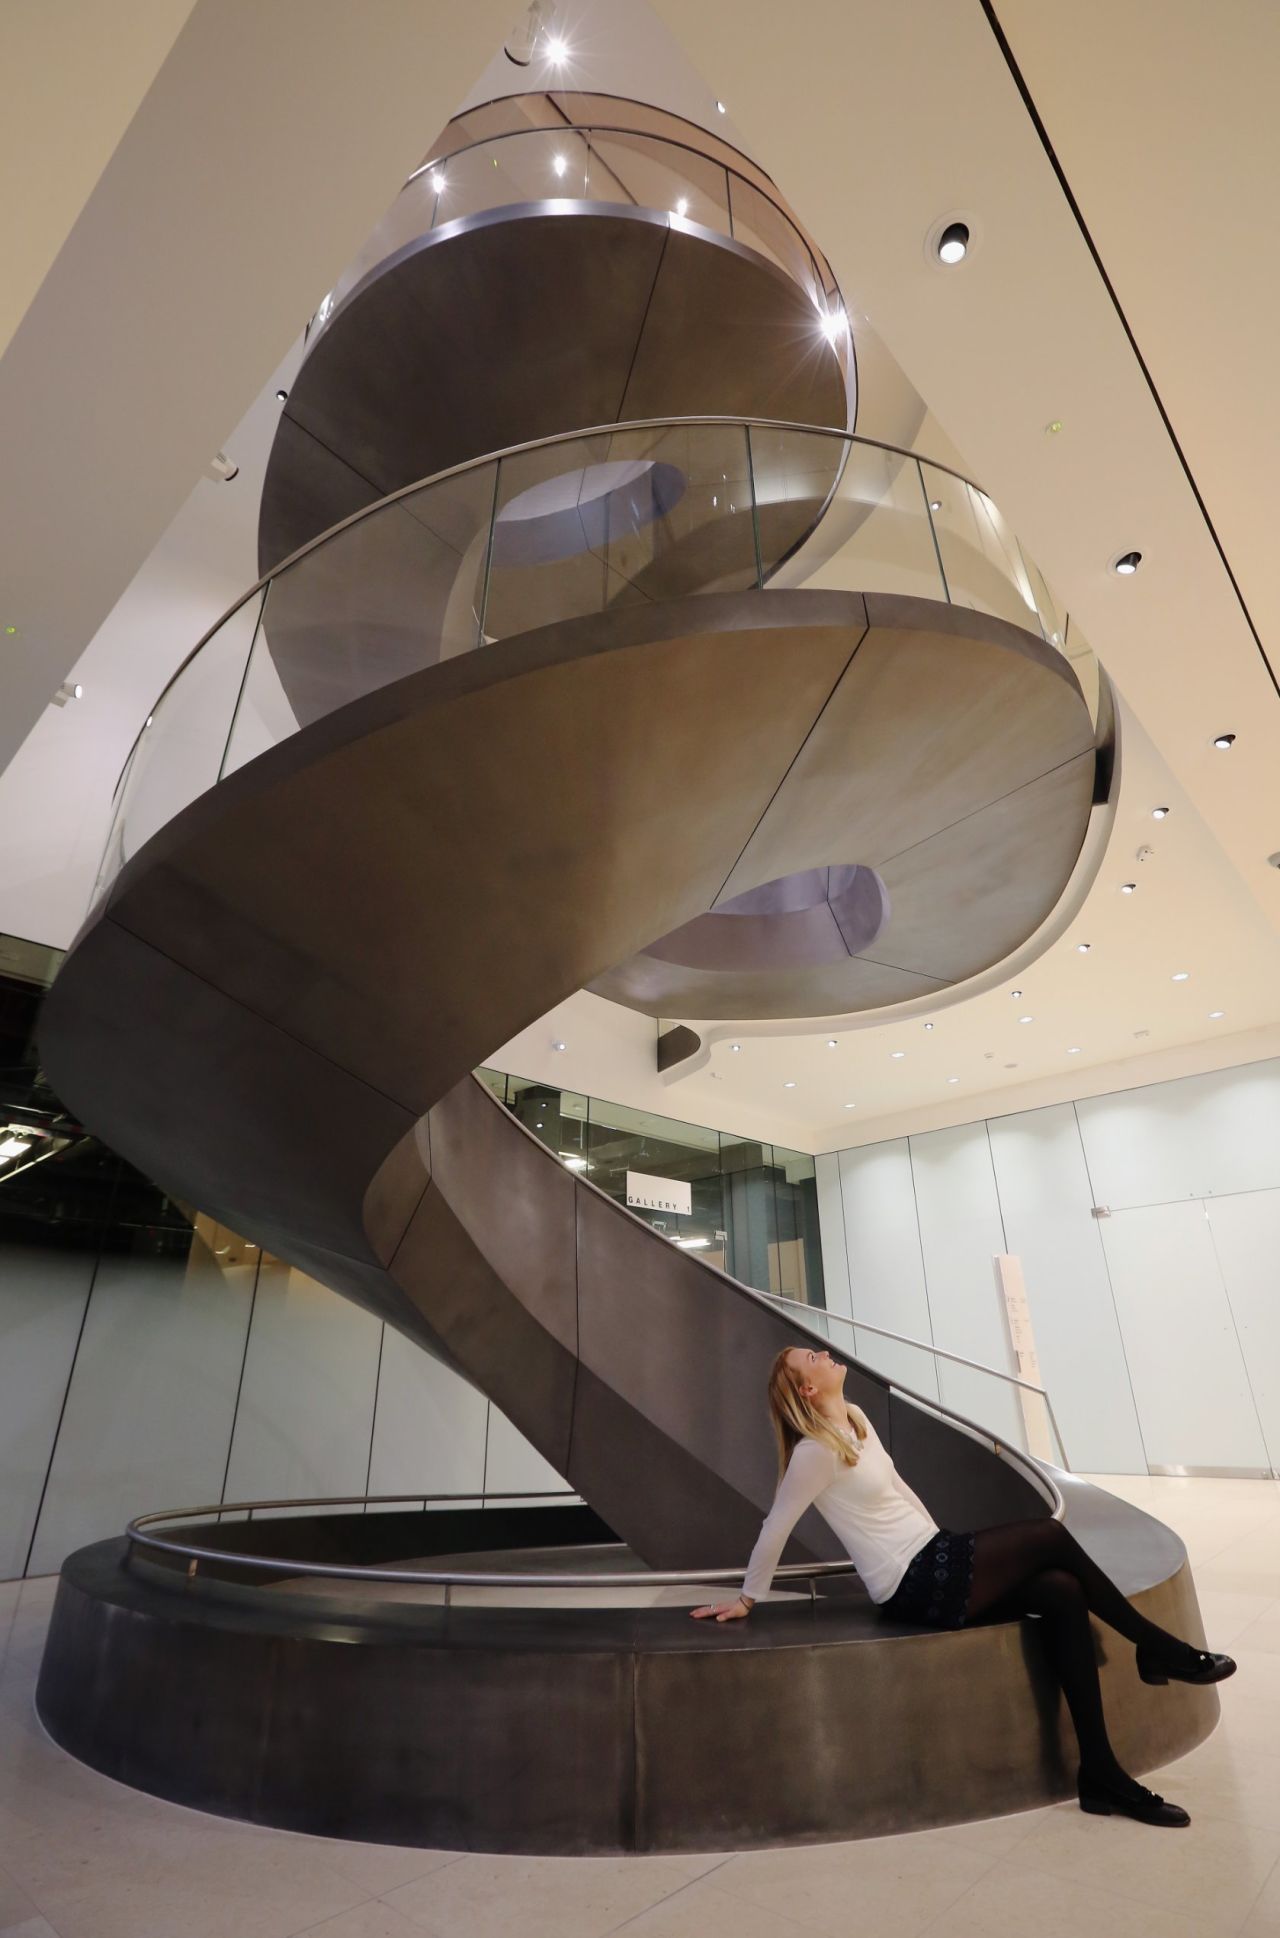 In London, the Wellcome Collection's showpiece staircase cost 1.1 million pounds ($1.5 million) and was designed by Wilkinson Eyre. 